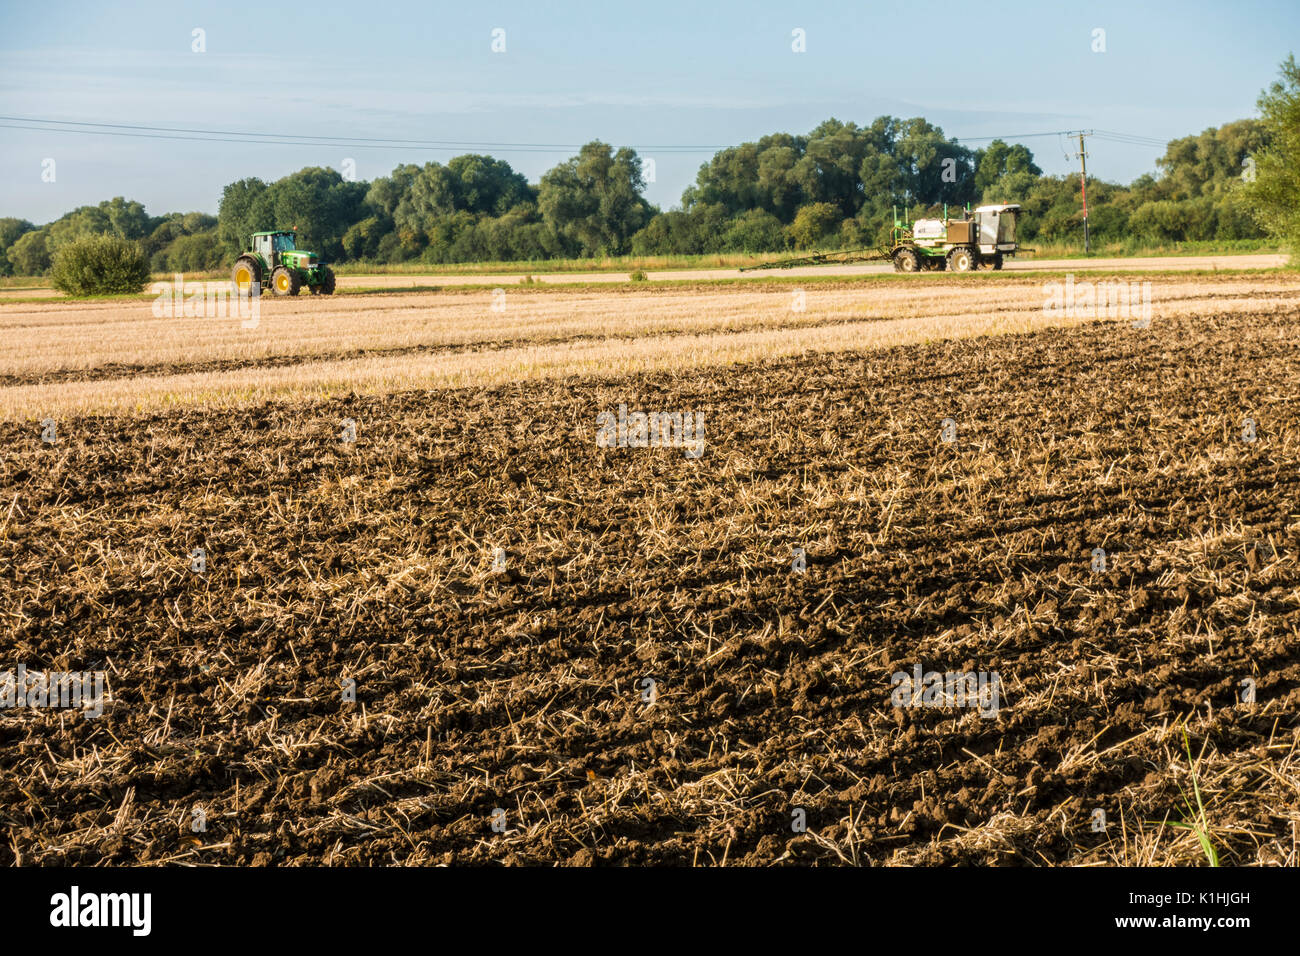 A farm field, after a harvested wheat crop, with a tractor turning over the soil at the end of the season, and another vehicle spraying. England, UK. Stock Photo